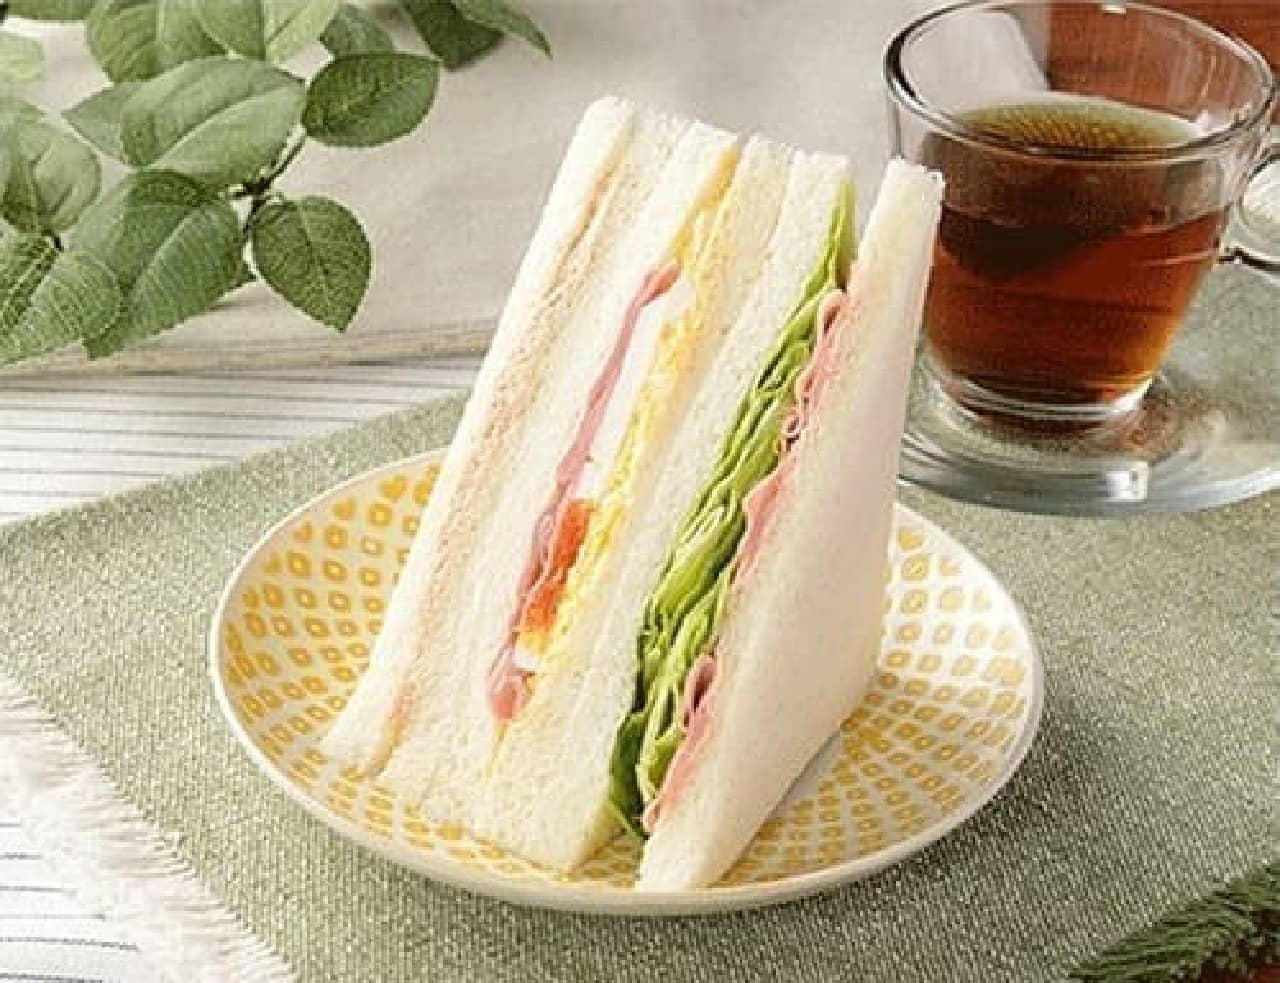 Lawson's "Mixed Sandwich (Increased)"